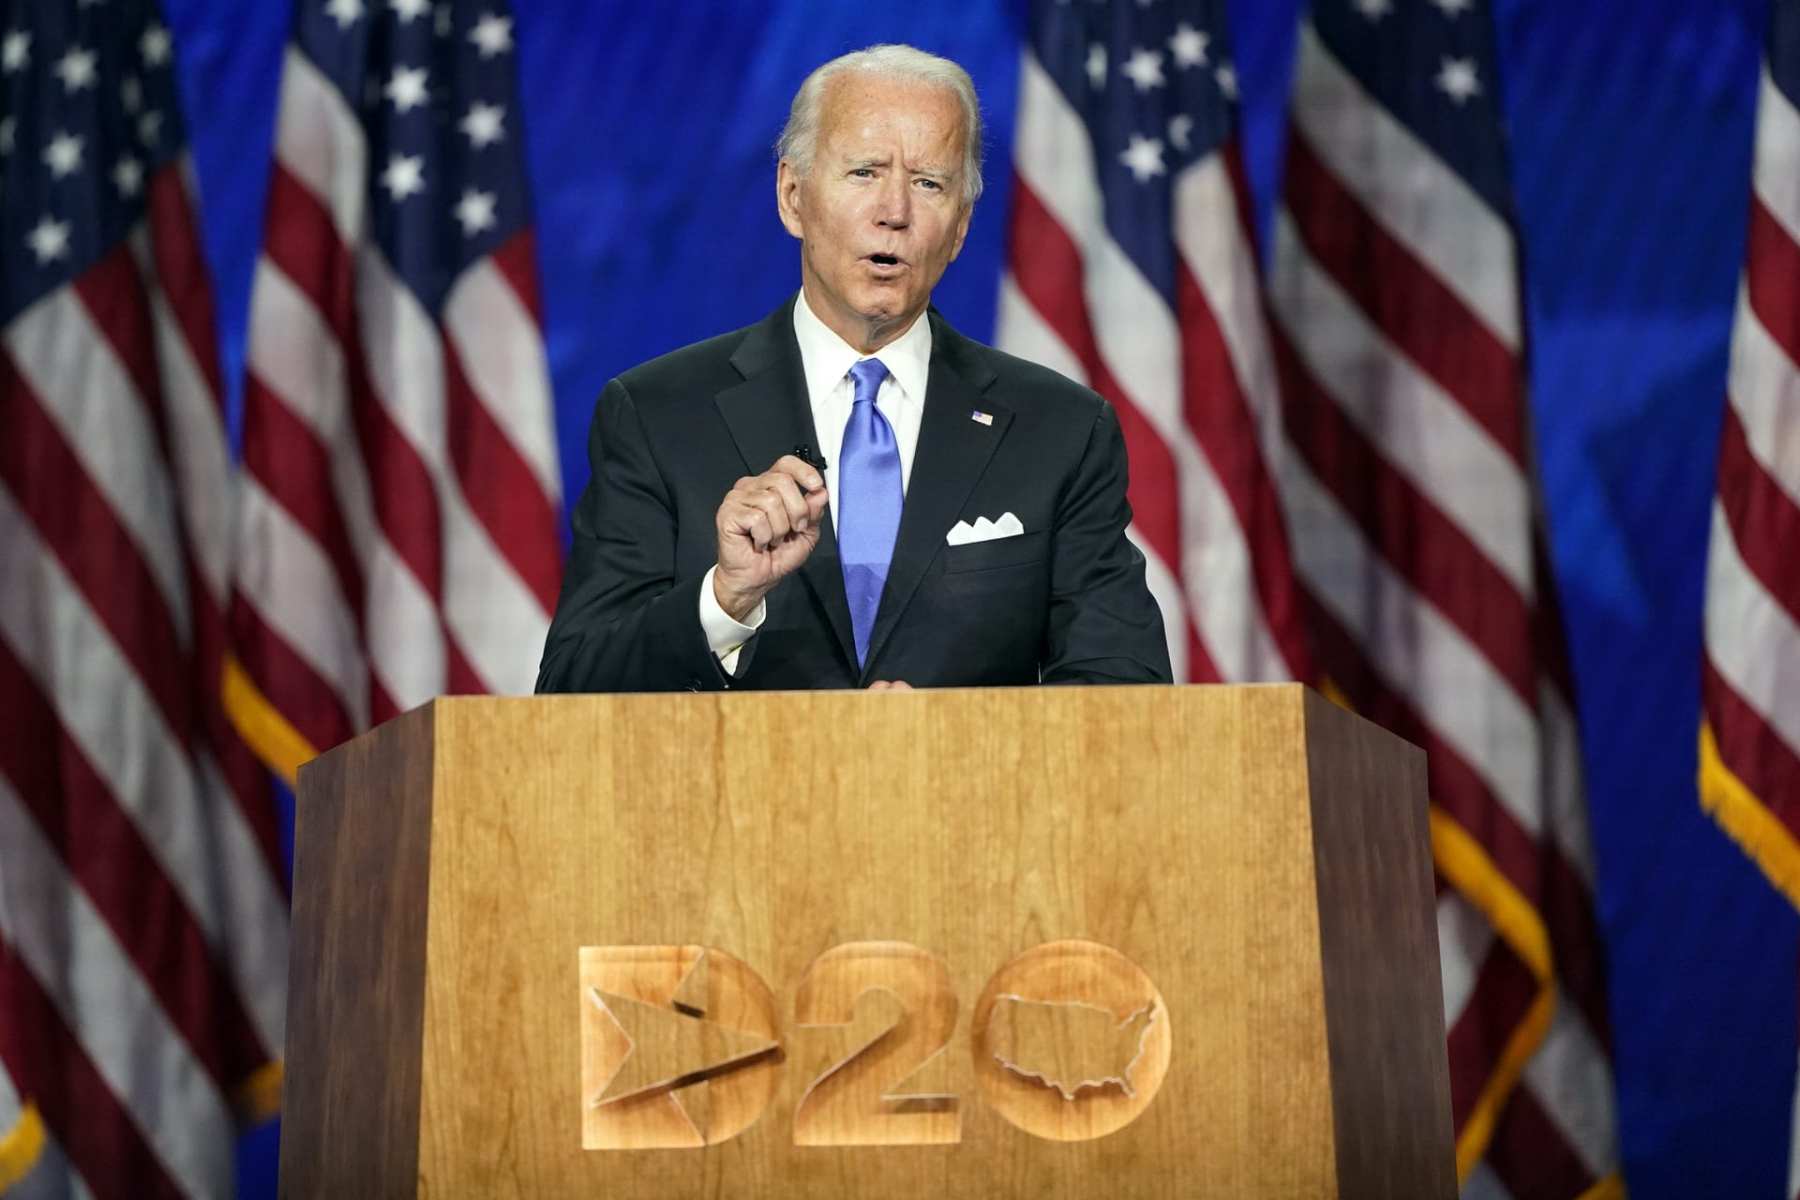 Joe Biden standing at a podium during the Democratic National Convention.